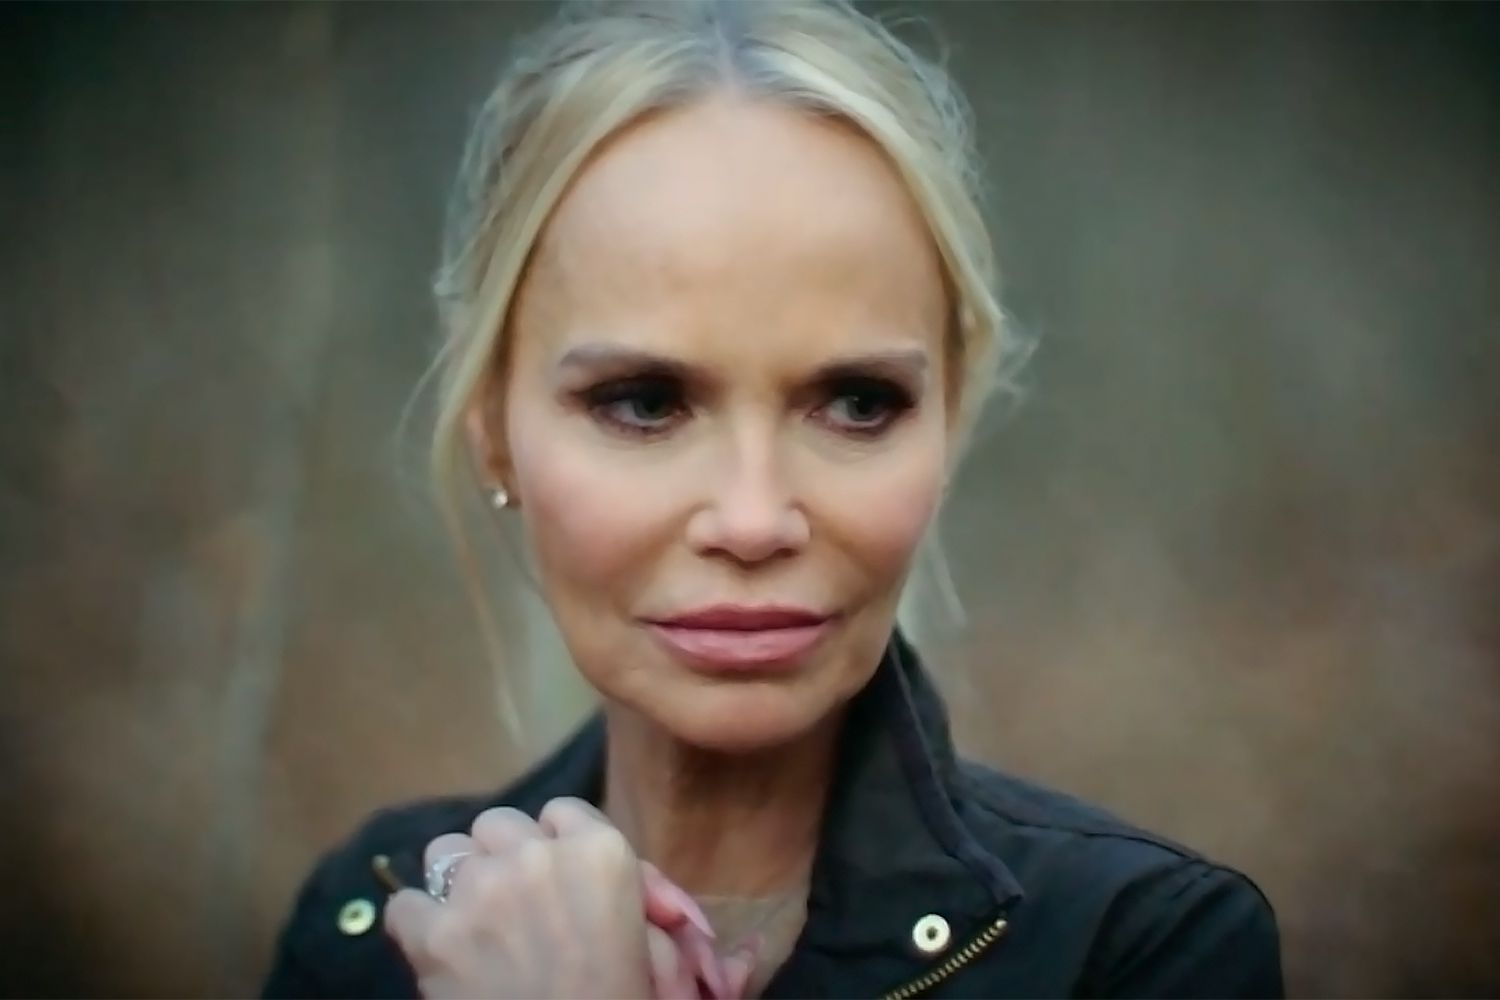 Kristin Chenoweth reveals shocking connection to Girl Scout murders: 'I should have been on that trip'